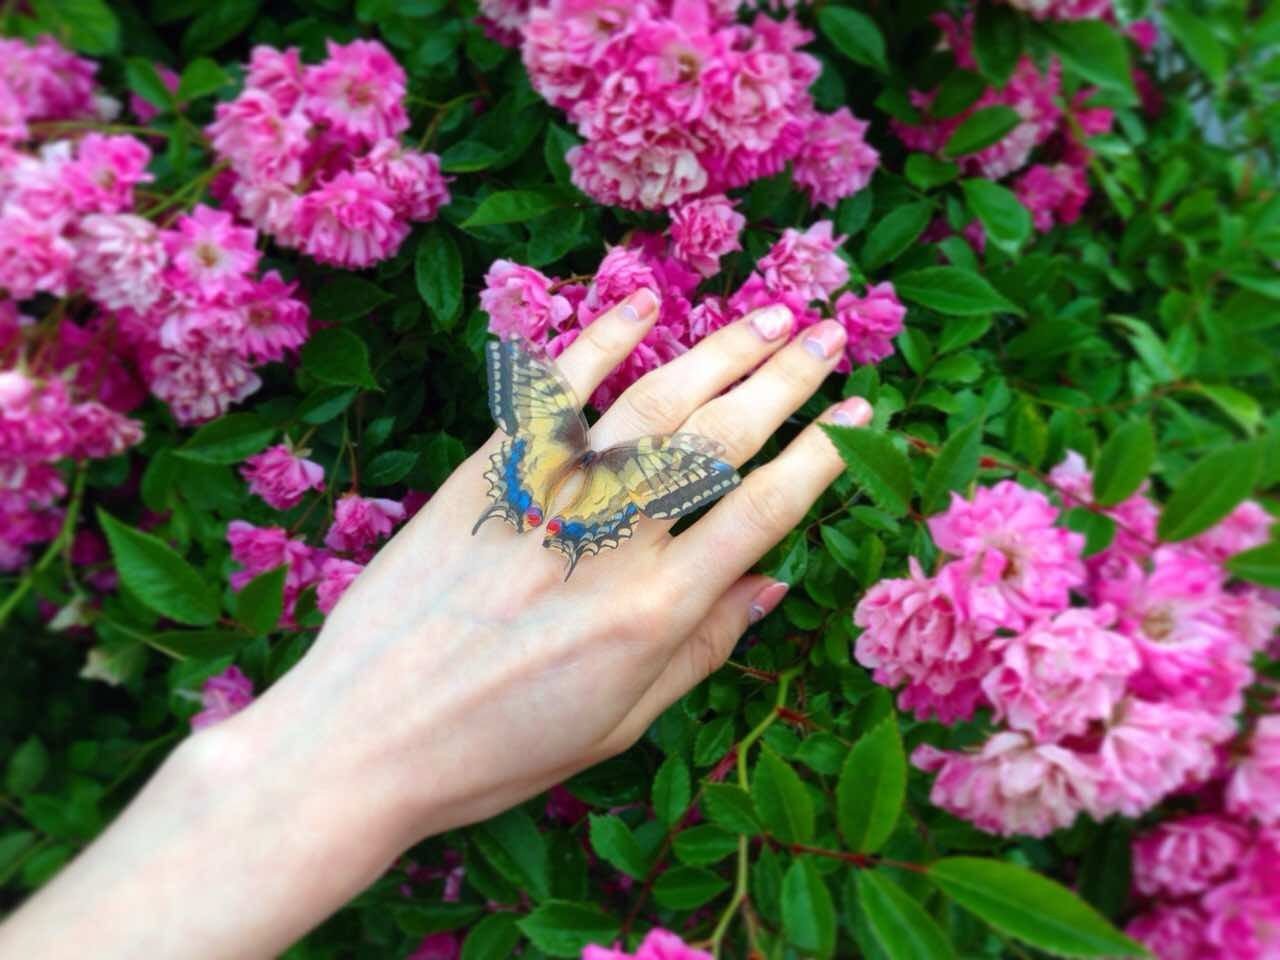 Unique statement piece for women who love nature-inspired jewelry